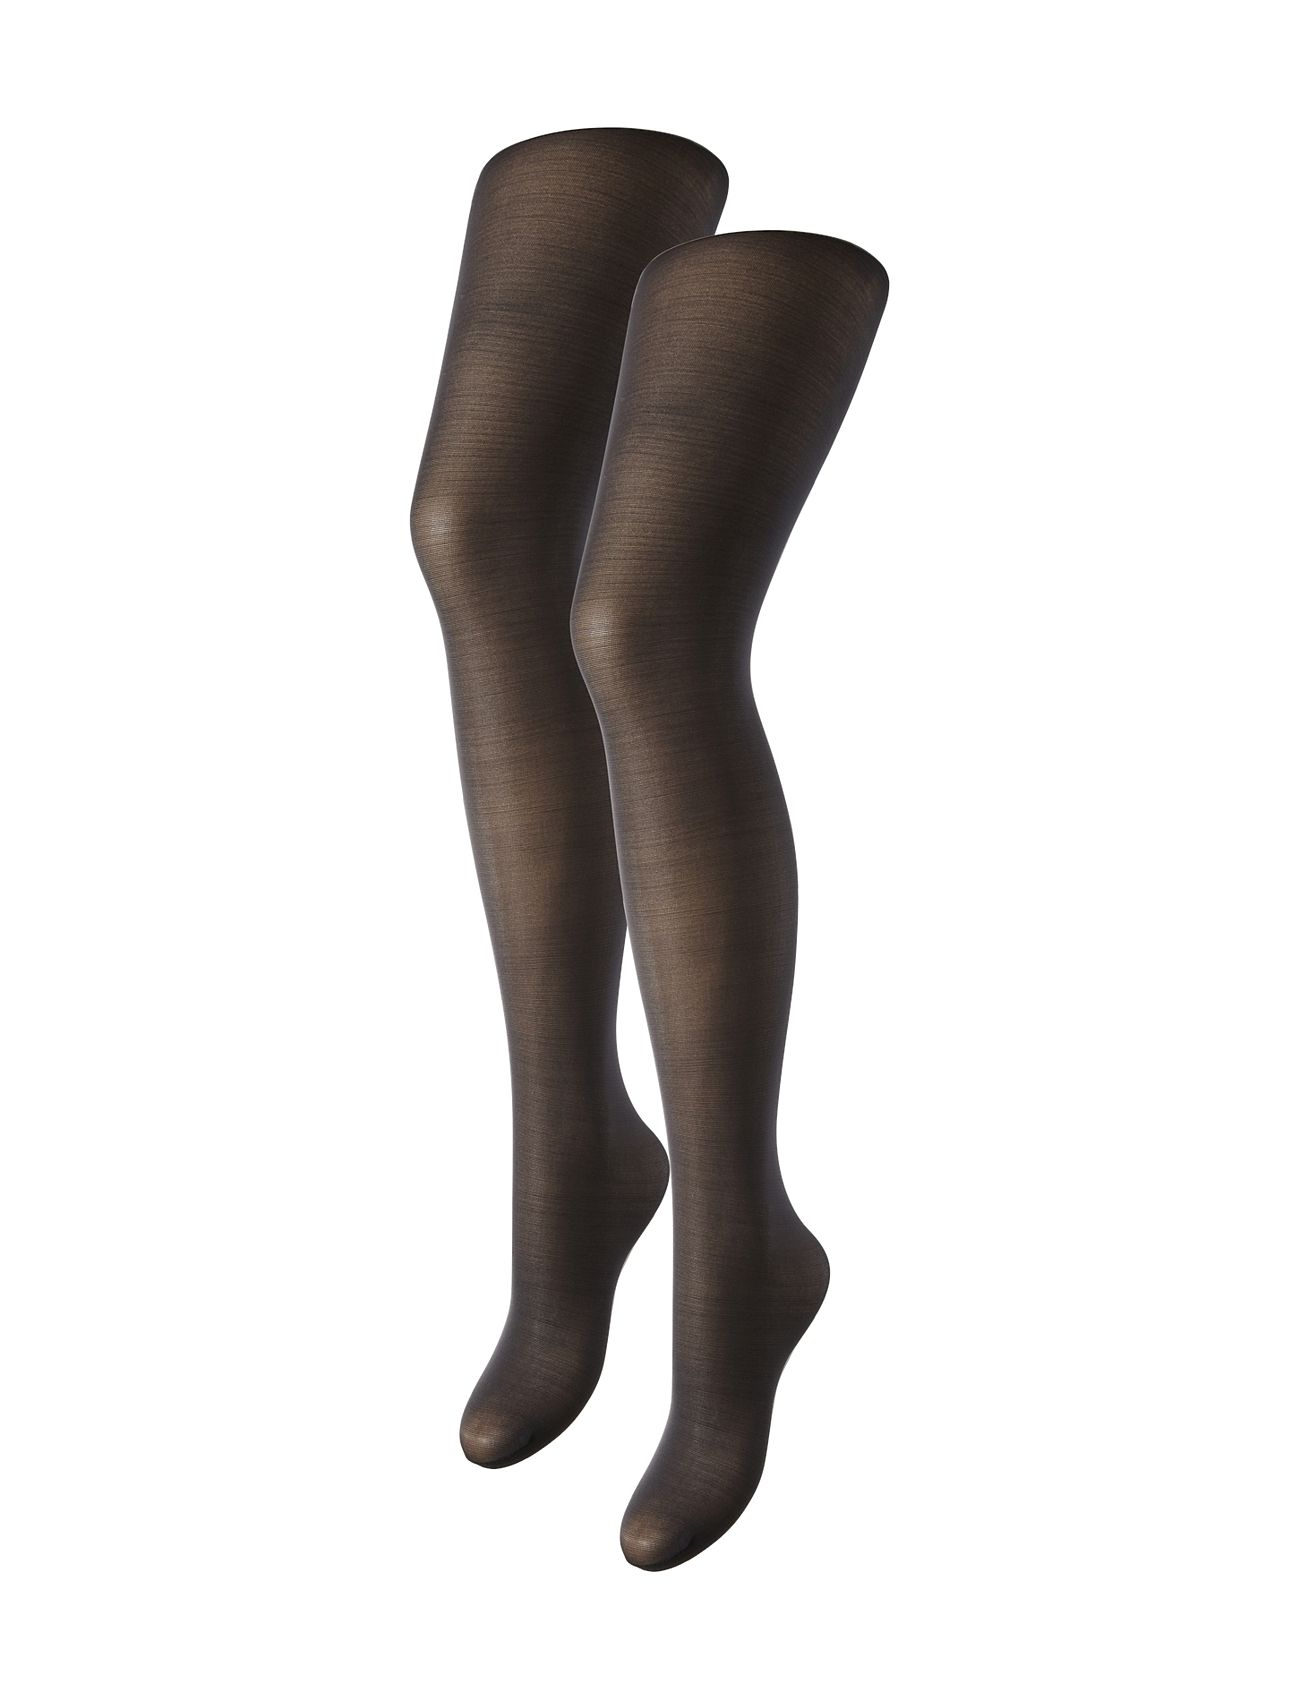 Pieces Pcnew Den Nikoline Tights 2 20 - Pack Pantyhose